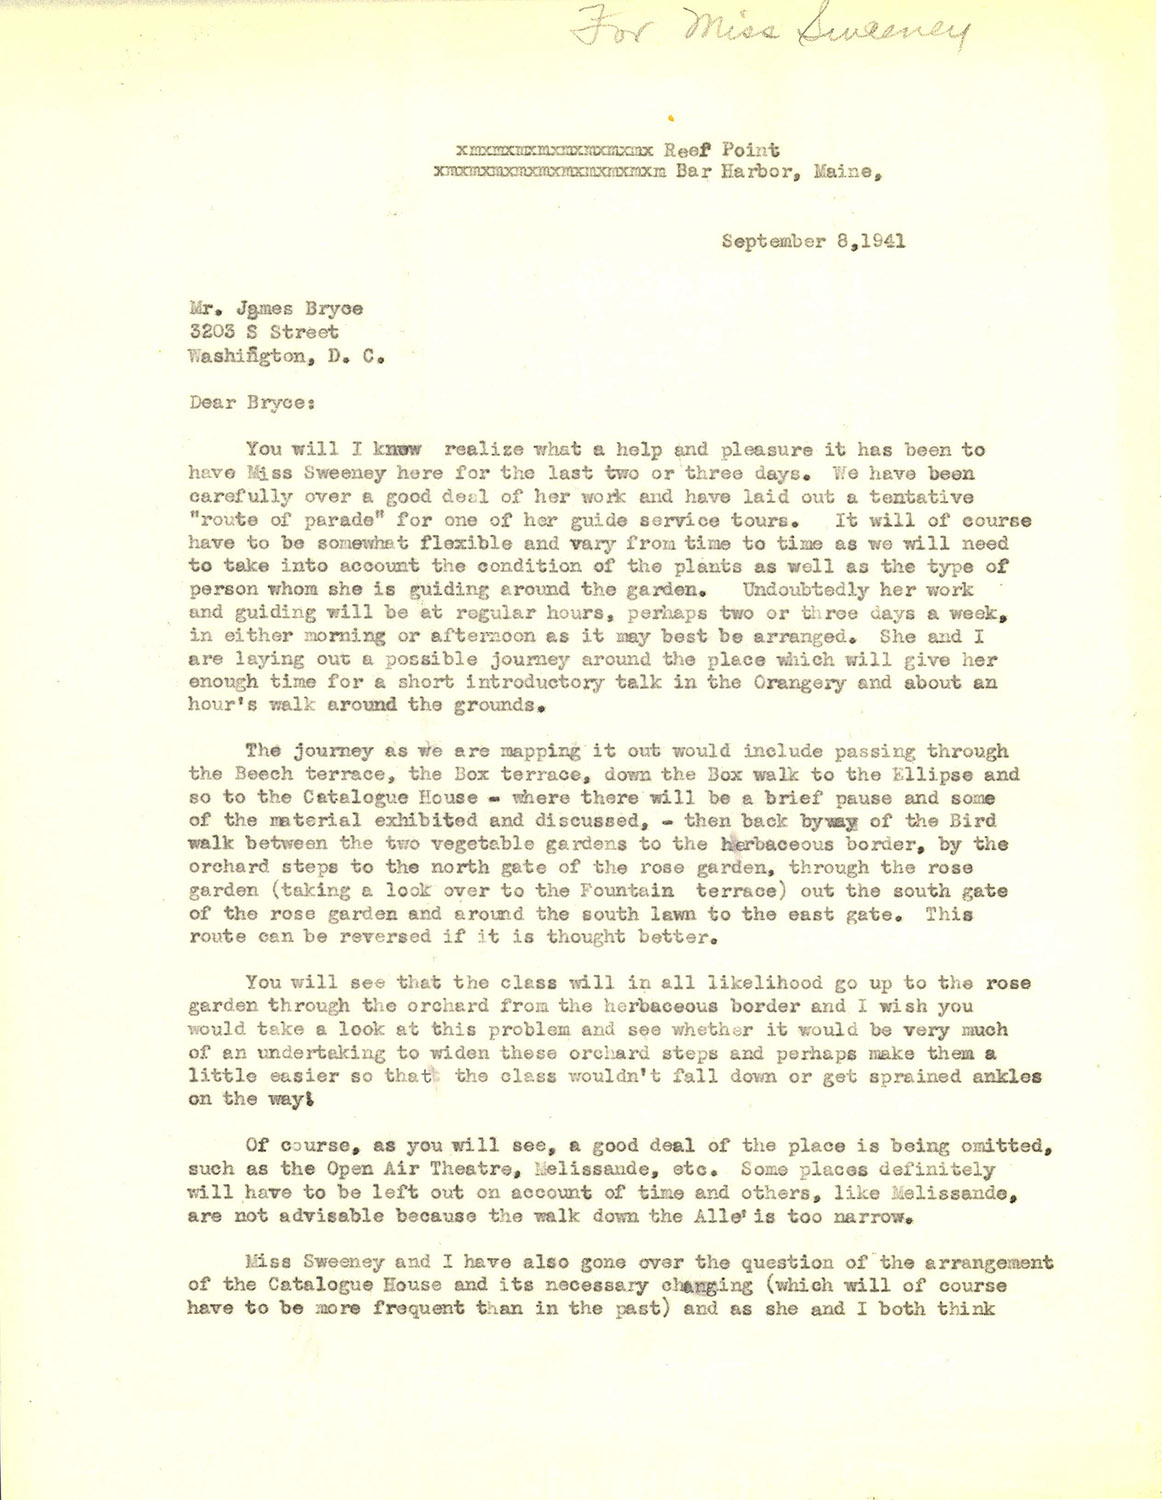 September 1941 letter from Beatrix Farrand to James Bryce